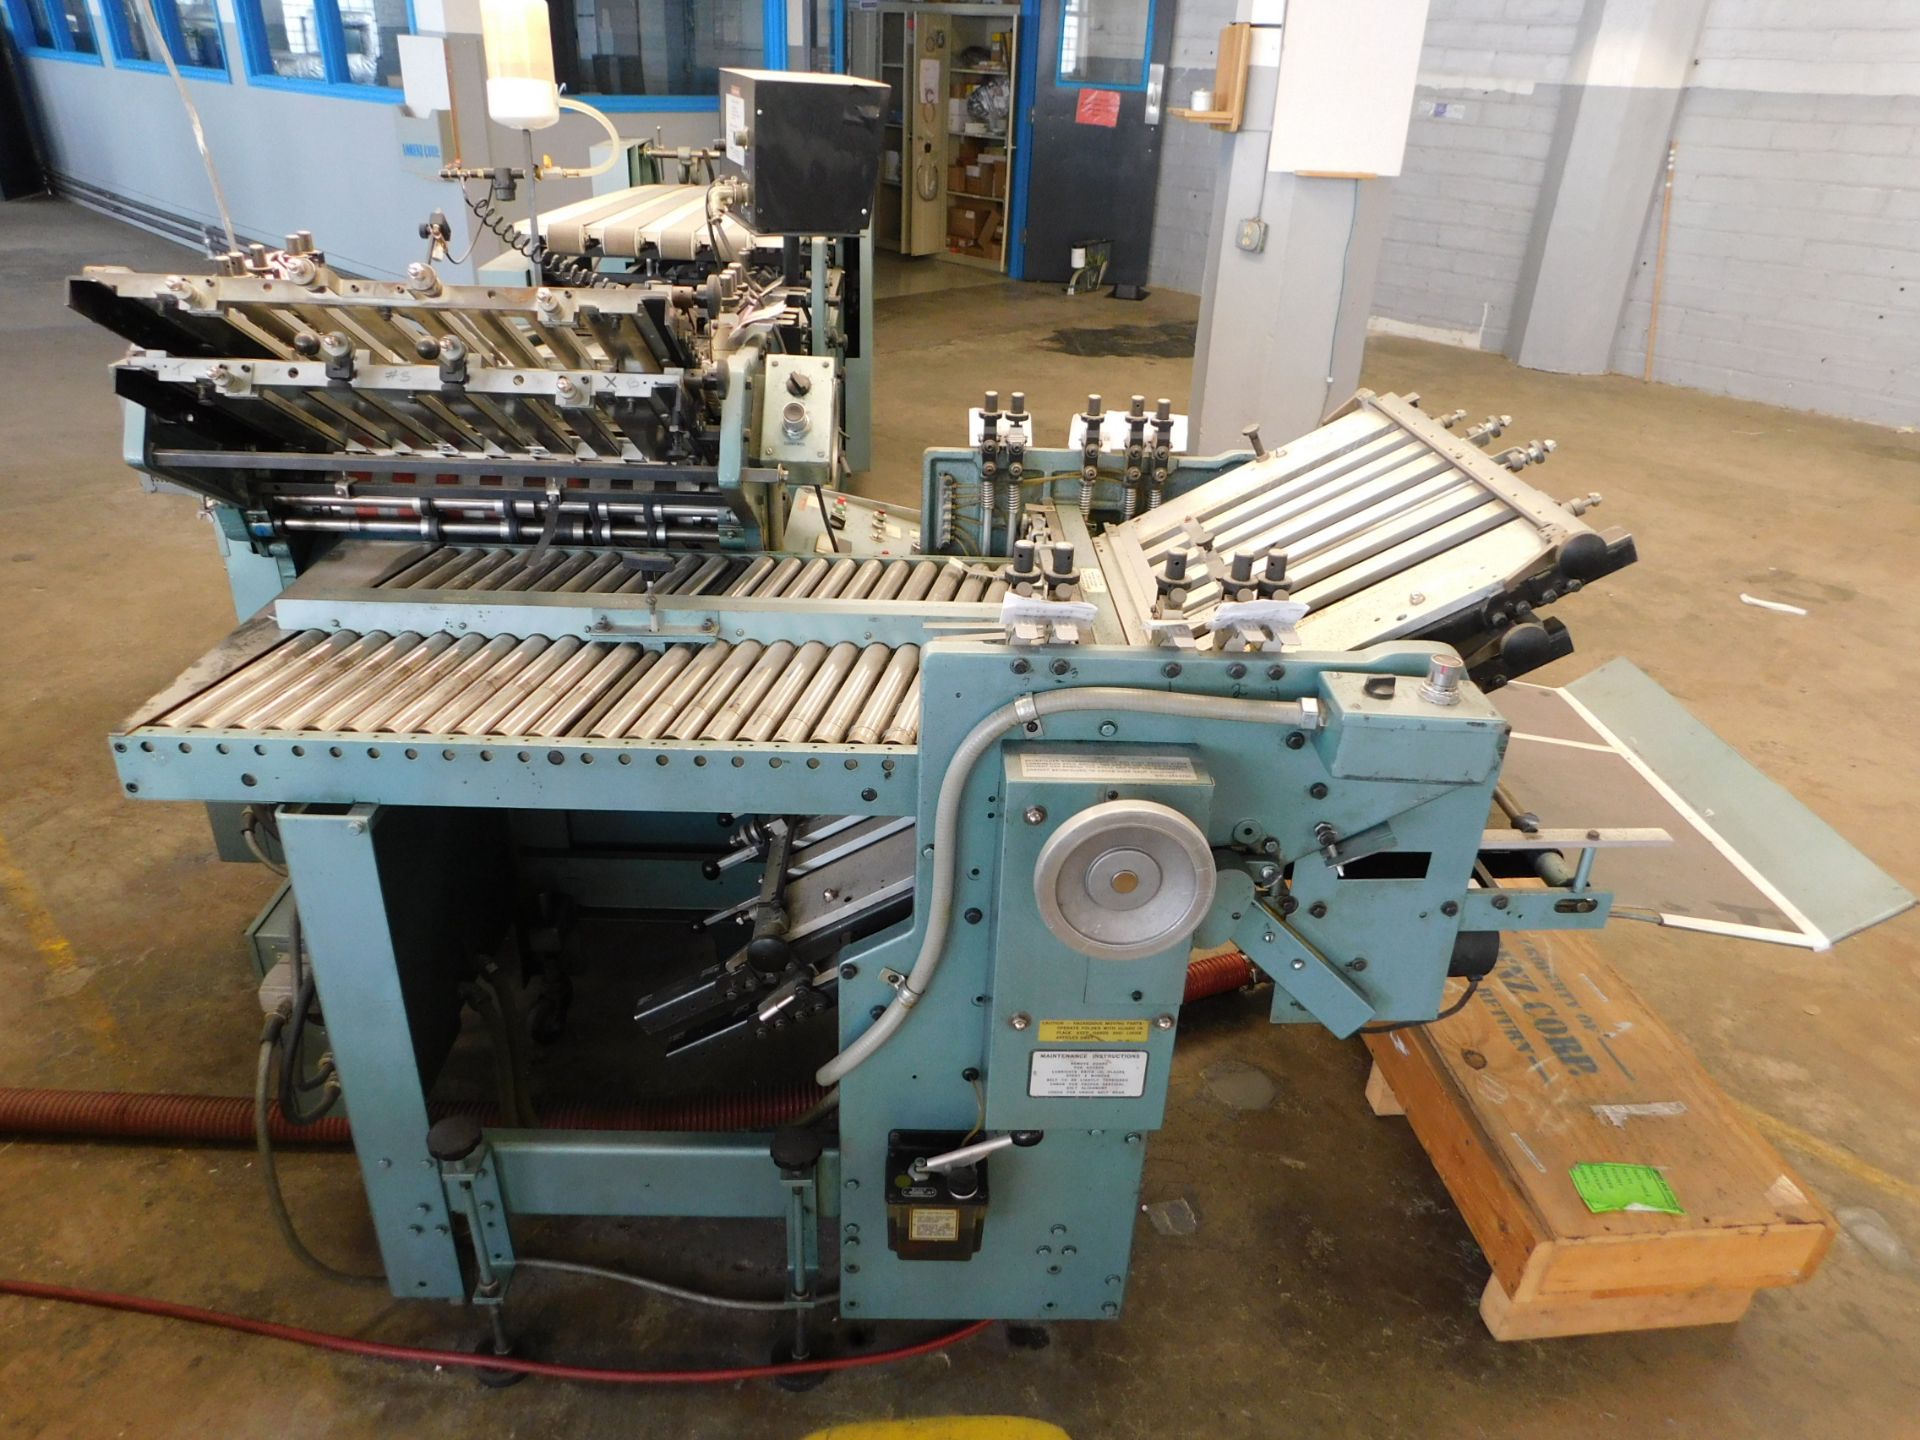 Baumfolder 720 - 20 x 26 700B folder with 8 page unit, includes 700B - 20 x 20 8pp folding unit with - Image 4 of 7